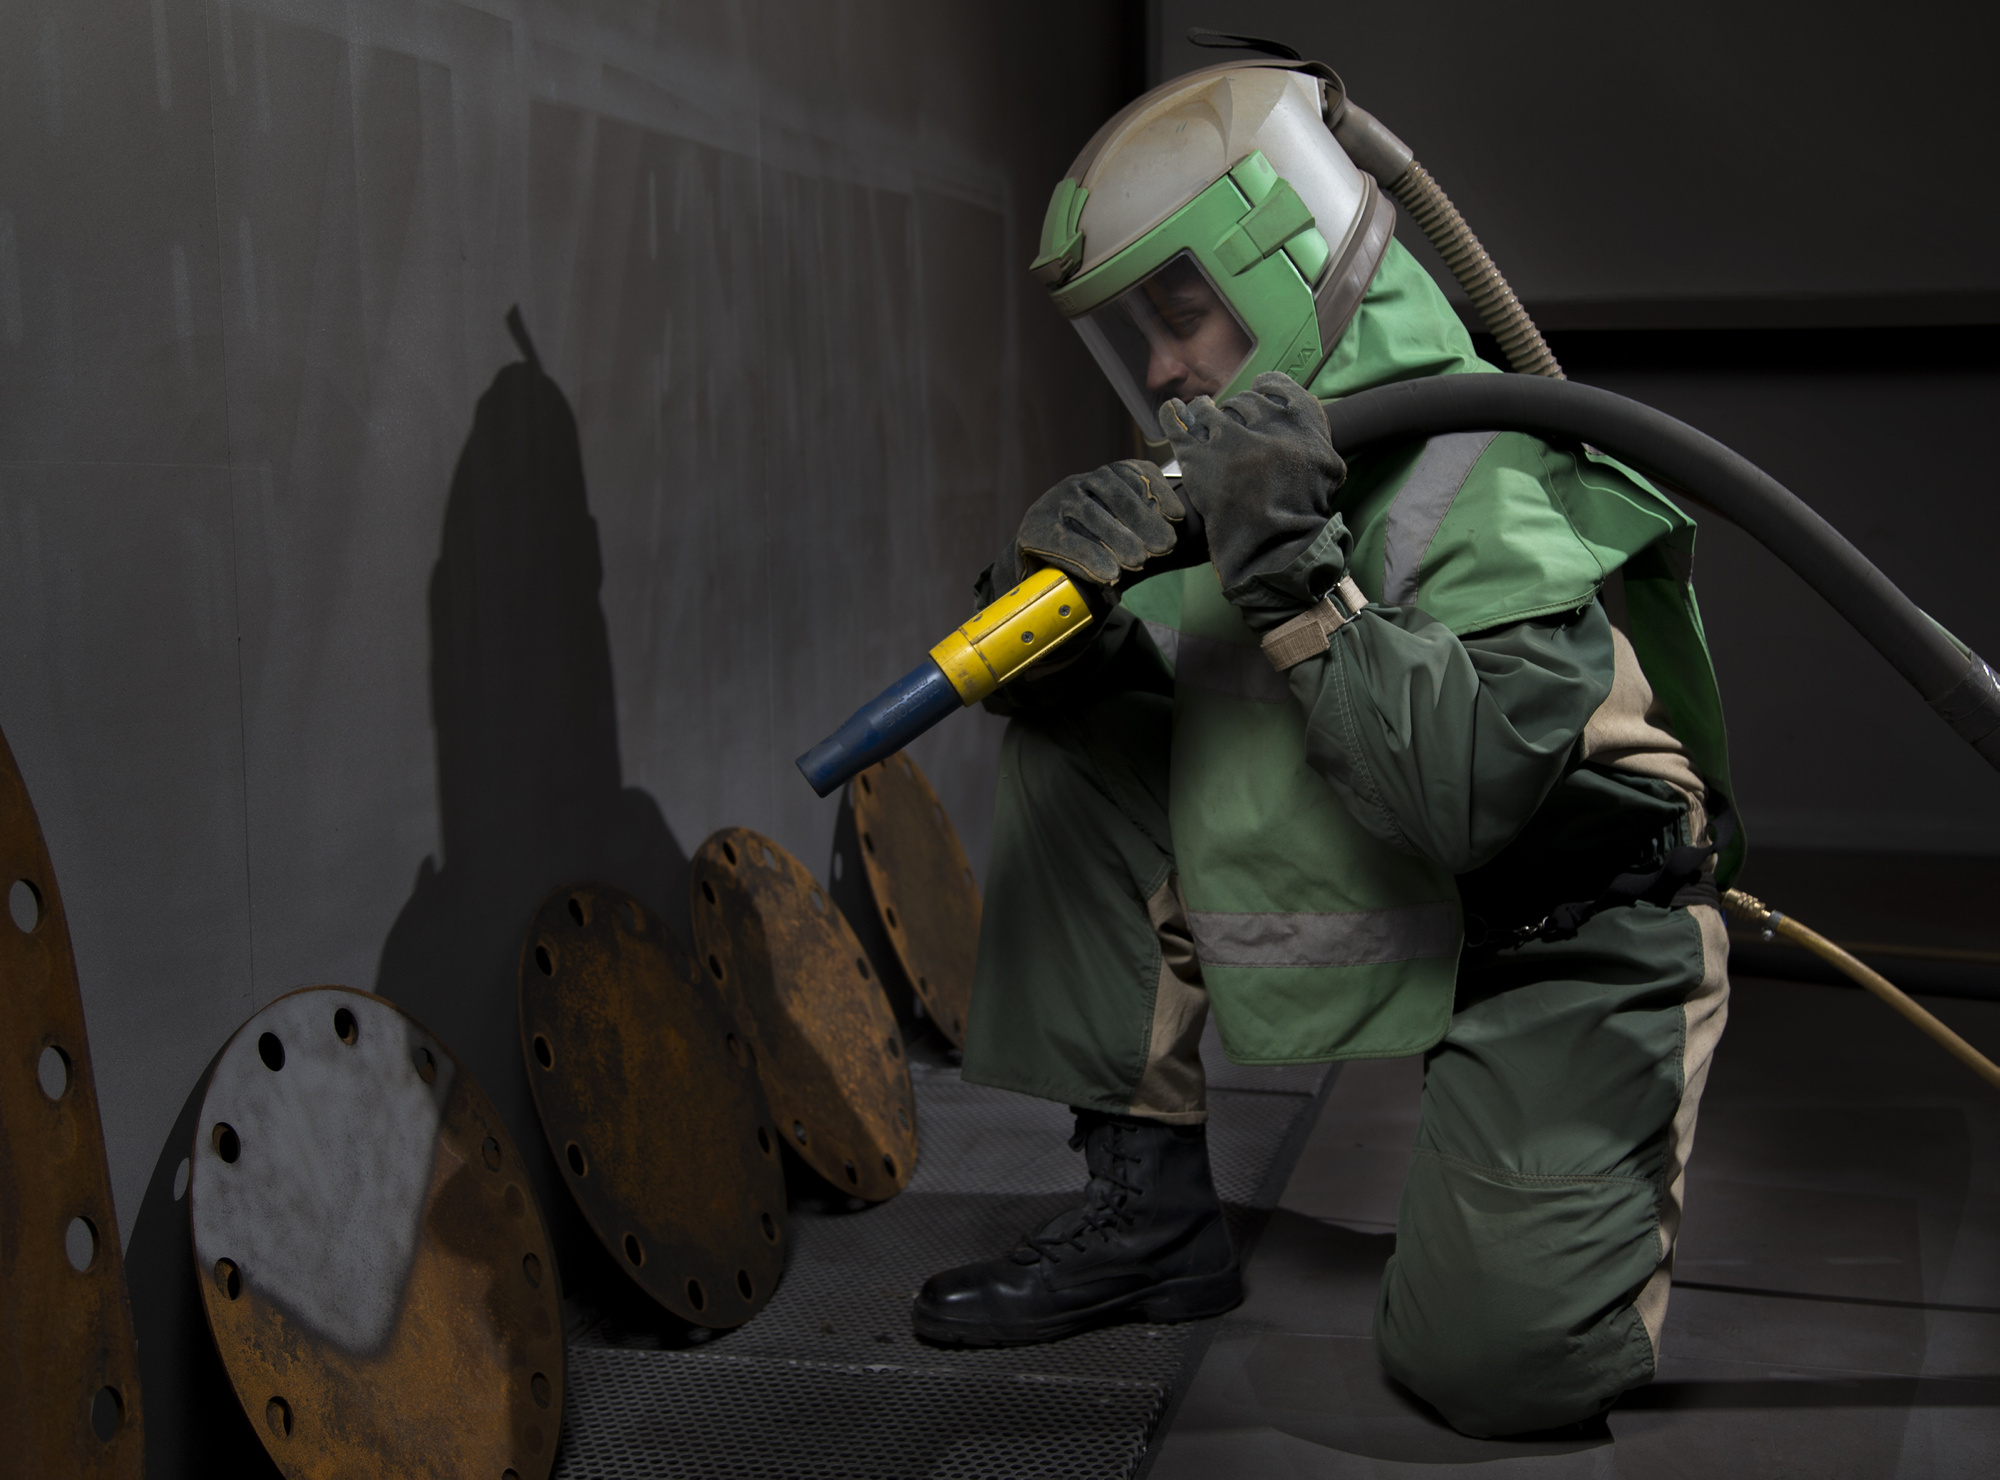 Able Seaman Boatswains Mate Alex Turner sandblasts hatch plates in preparation for painting at the HMAS Stirling Fleet Support Unit's Corrosion Control section.